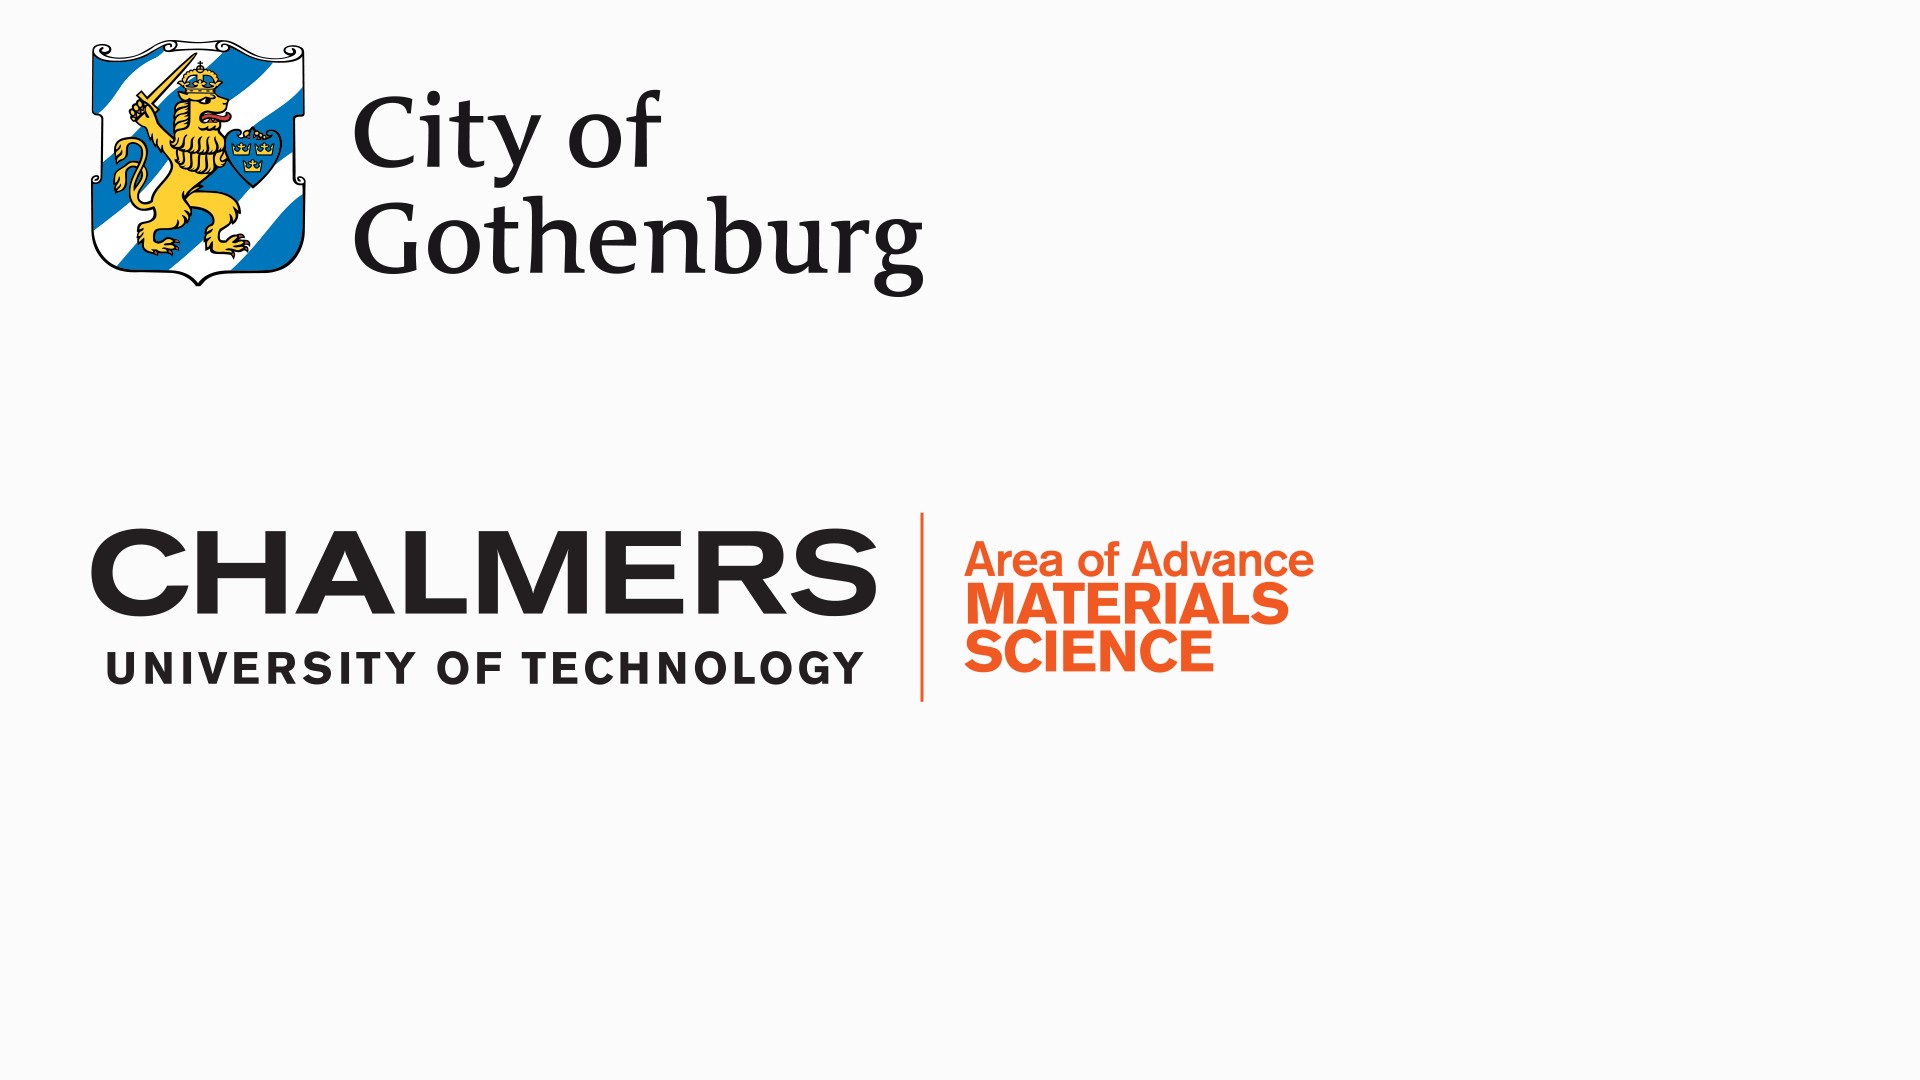 The logotypes of the conference sponsors: Göteborgs stad, and Chalmers Materials Science Area of Advance.